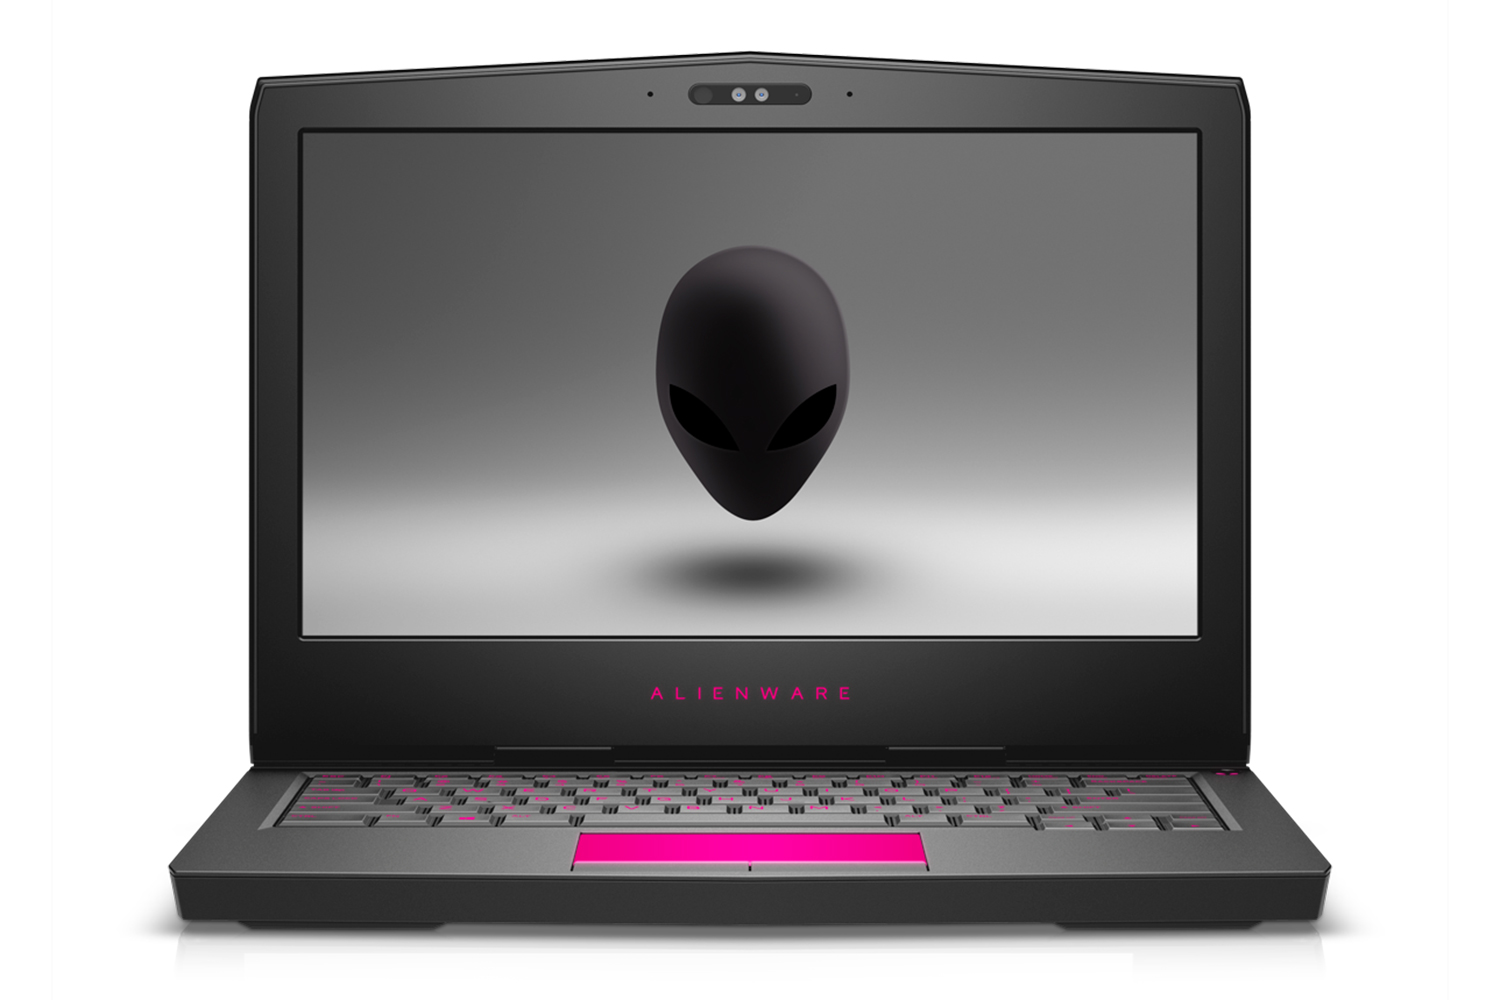 dell alienware inspiron 7000 gaming laptops refresh intel seventh gen cpu aw 13 03